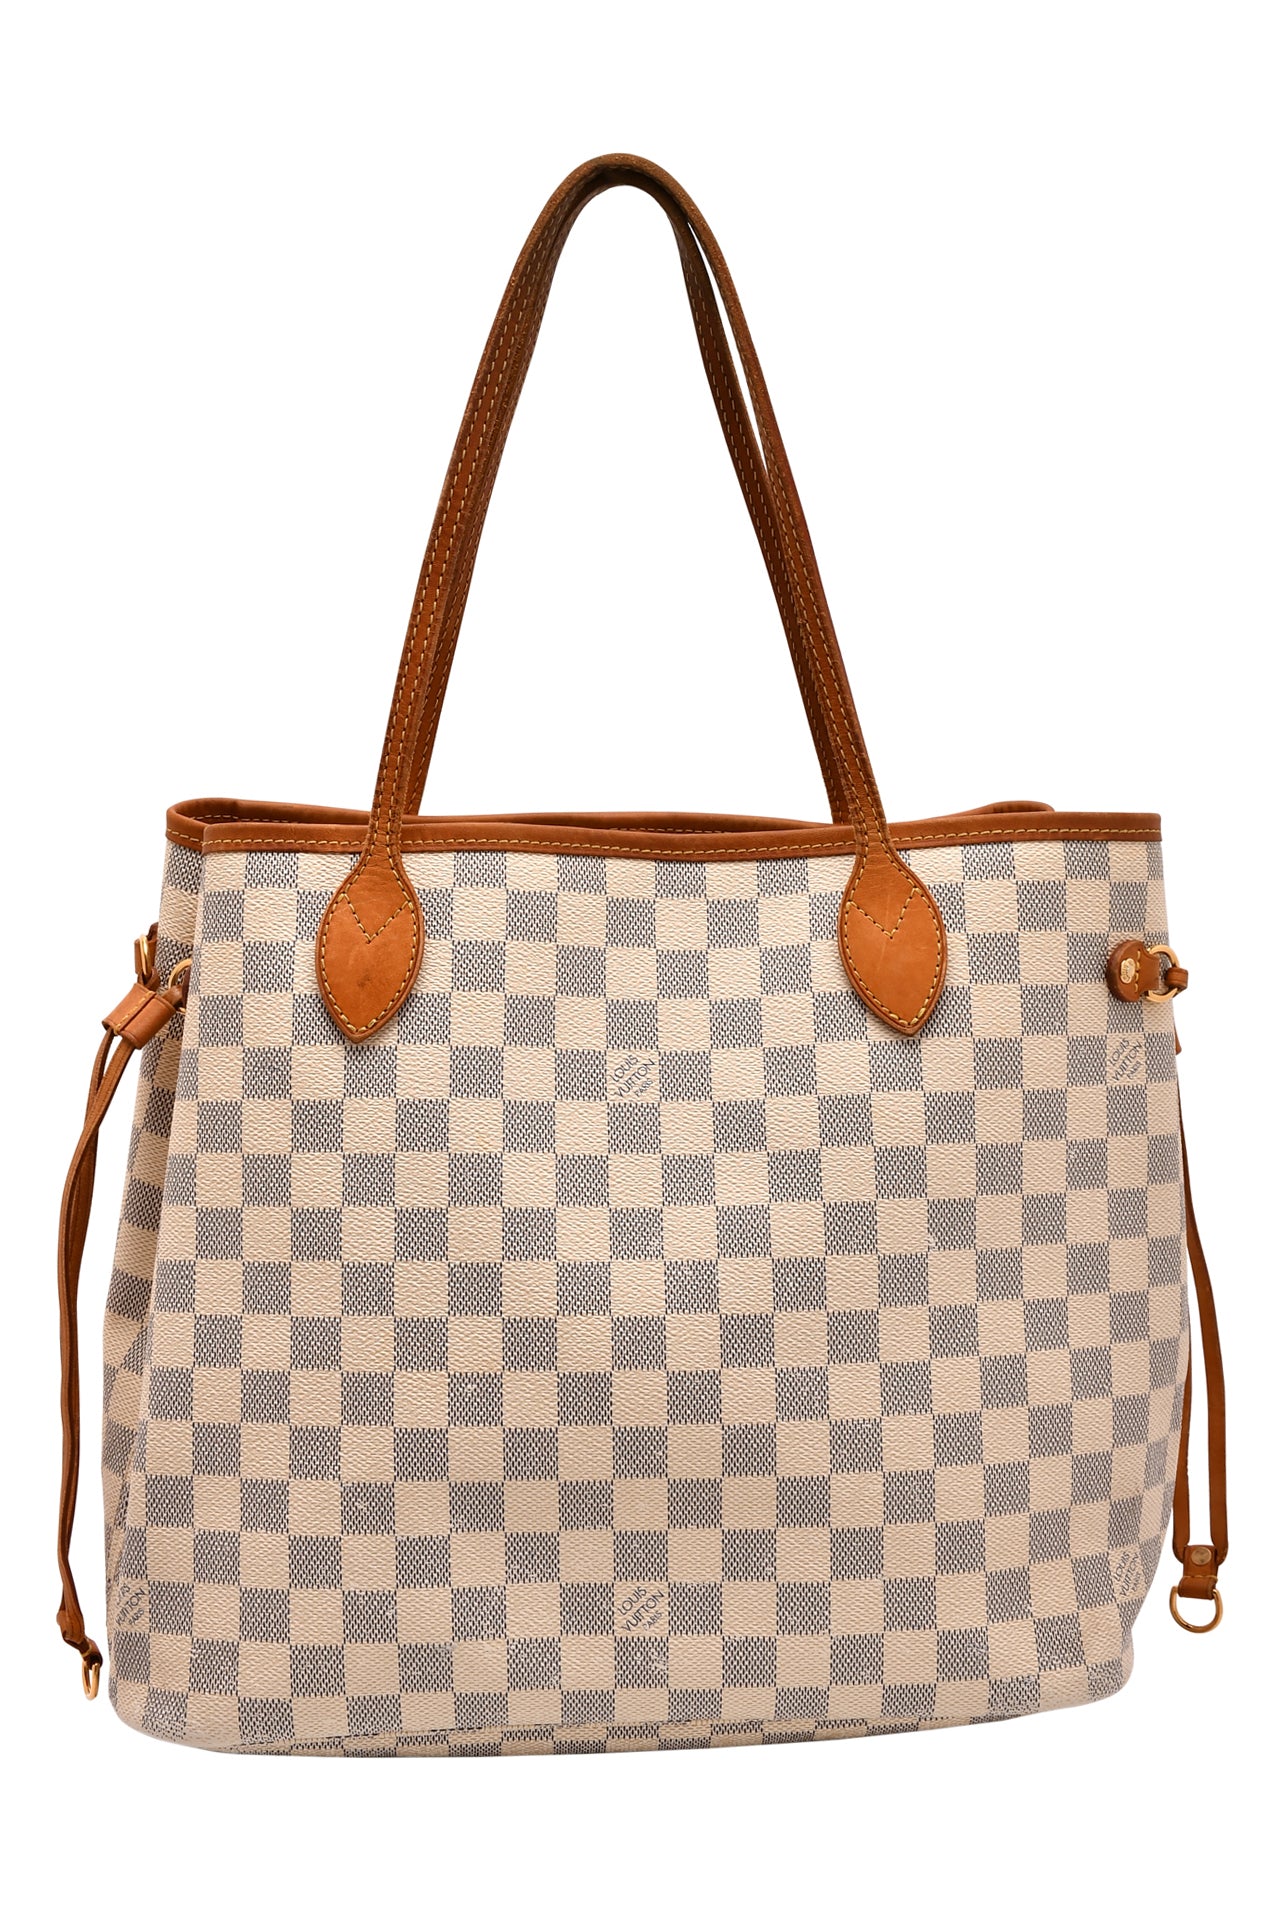 cost of neverfull louis vuittons